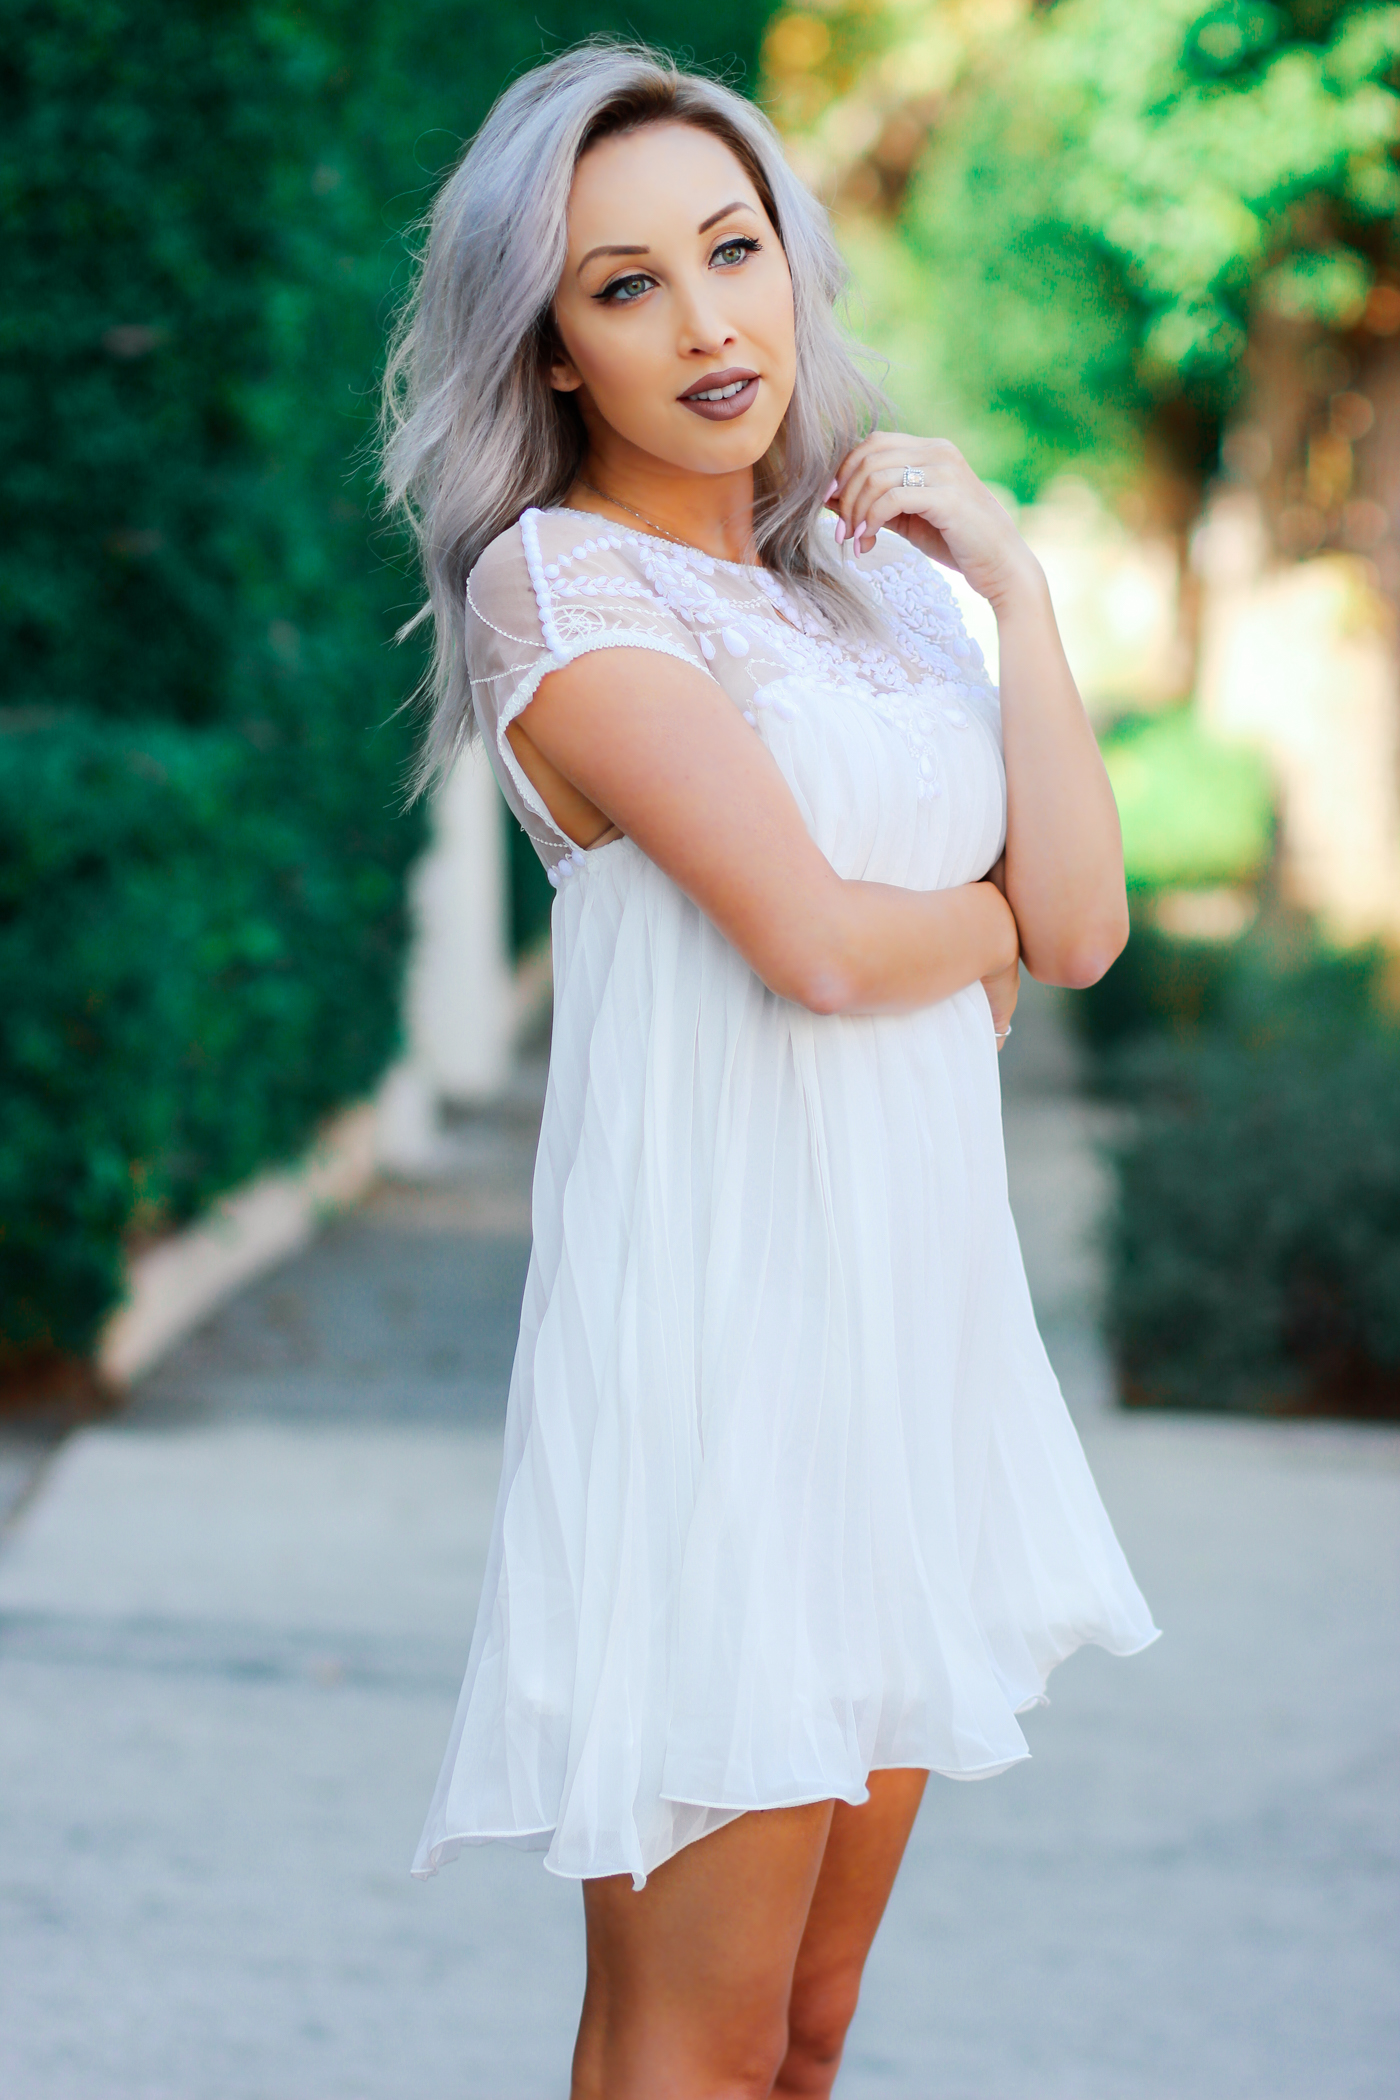 Blondie in the City | White Beaded BabyDoll Dress @Chicwish | Bridal Shower Dress | Bachelorette Party Dress